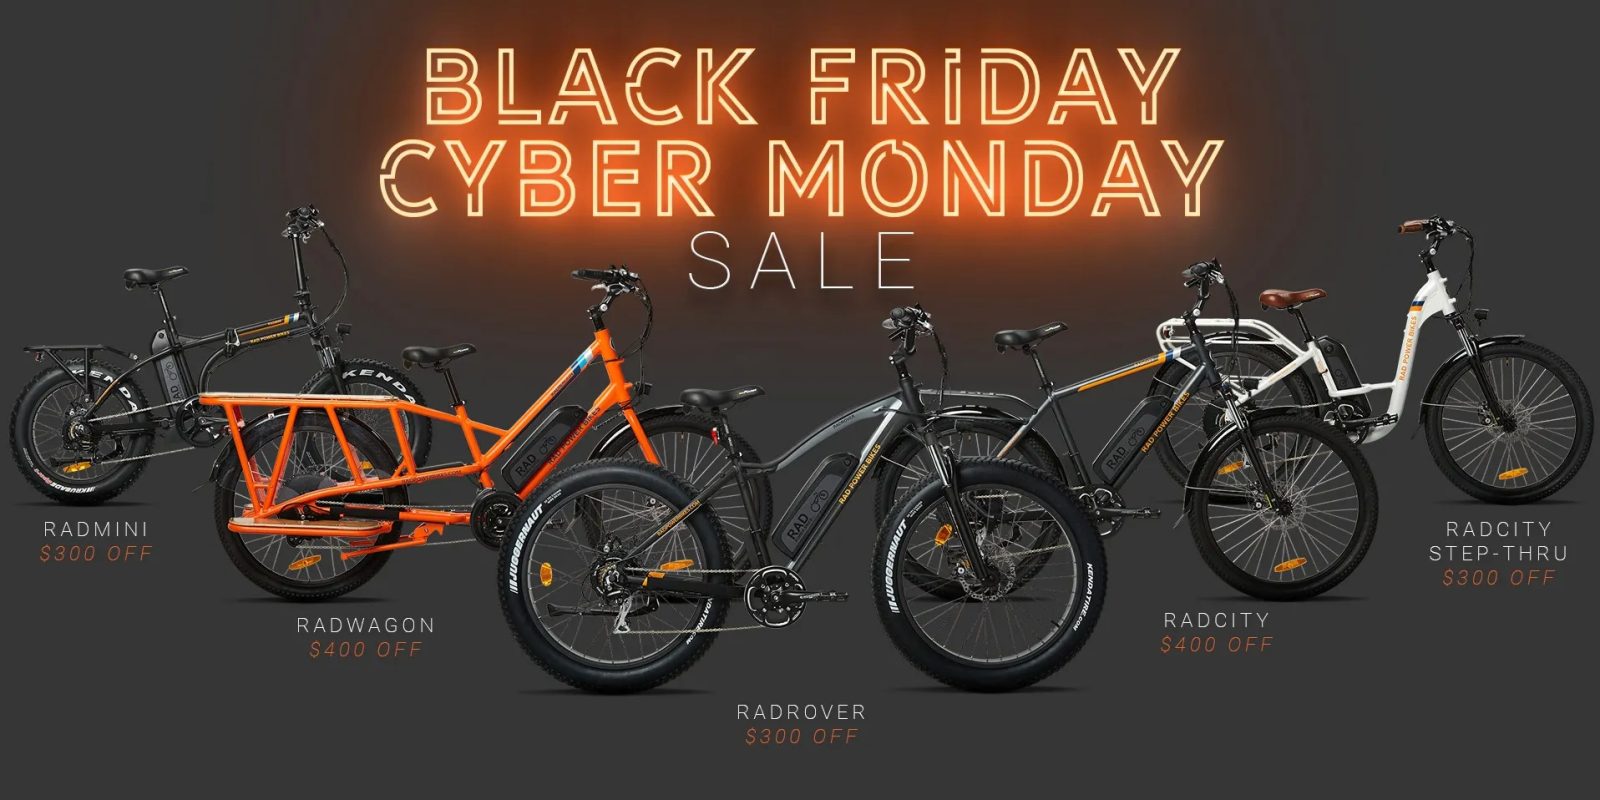 Black Friday Electric Bicycle Shopping Guide Preview Here Are The Deals